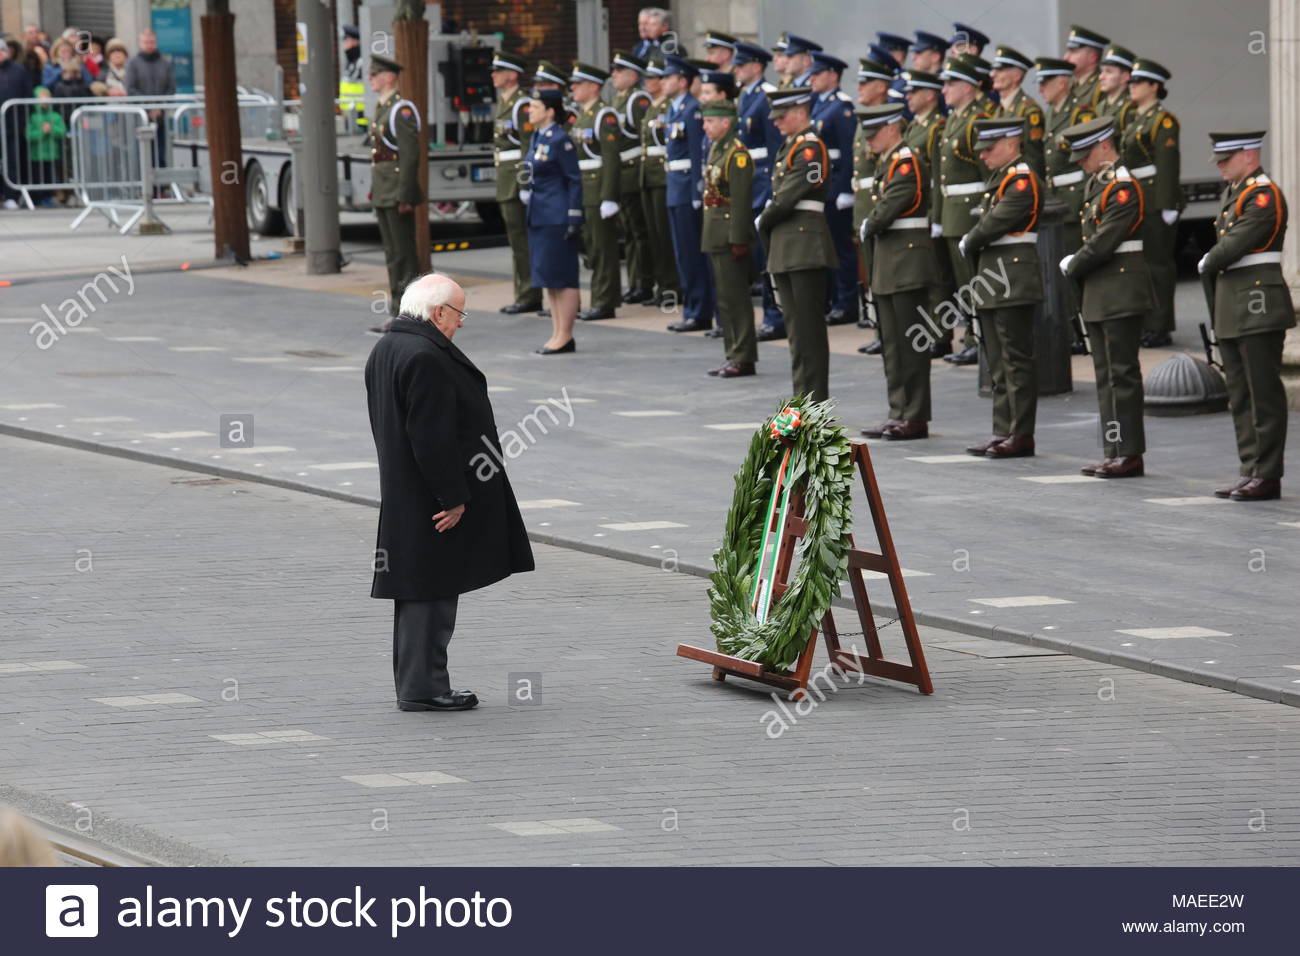 Dublin, Ireland. 1st April 2018. Dublin, Ireland. 01/04/2018 Easter 1916 Rising Commemorative Ceremony takes place in Dublin. President Michael D. Higgins bows at the GPO in Dublin Ireland during the 1916 ceremonial parade in honour of the men and women who fell during the rebellion against British rule. Credit: reallifephotos/Alamy Live News Stock Photo